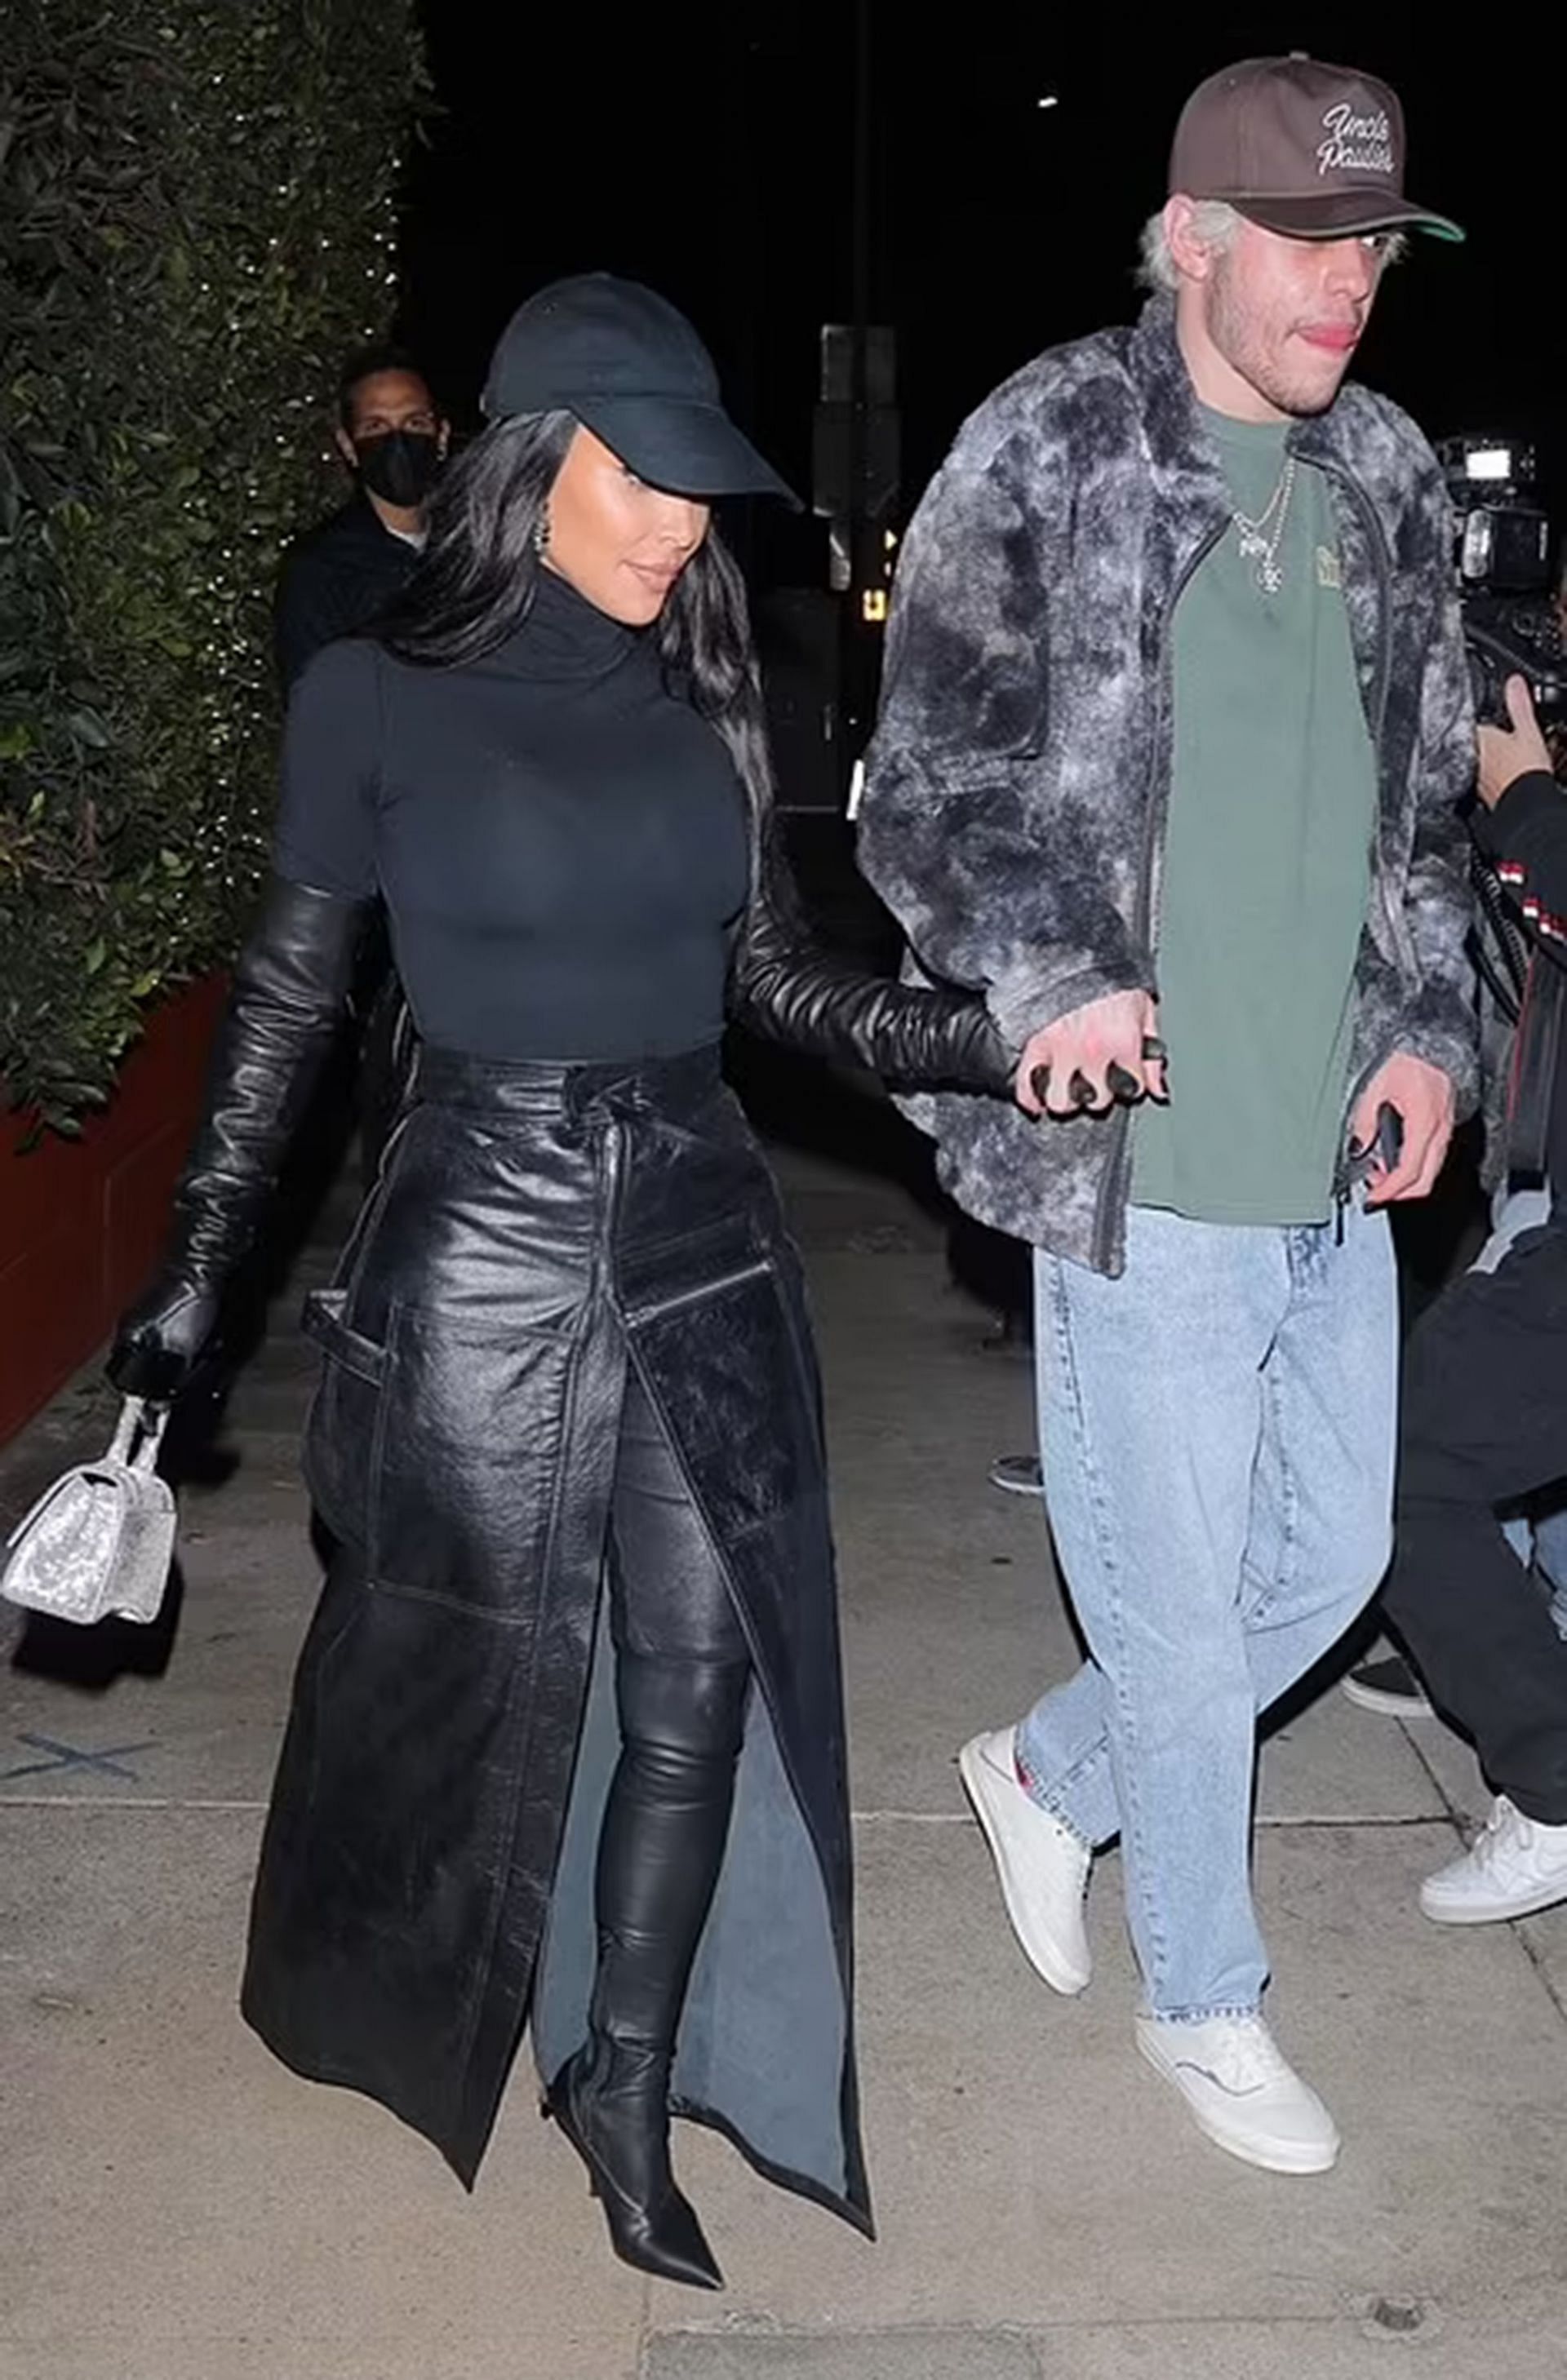 Kim and Pete stepping out from Giorgio Baldi after a dinner date (Image via Daily Mail)